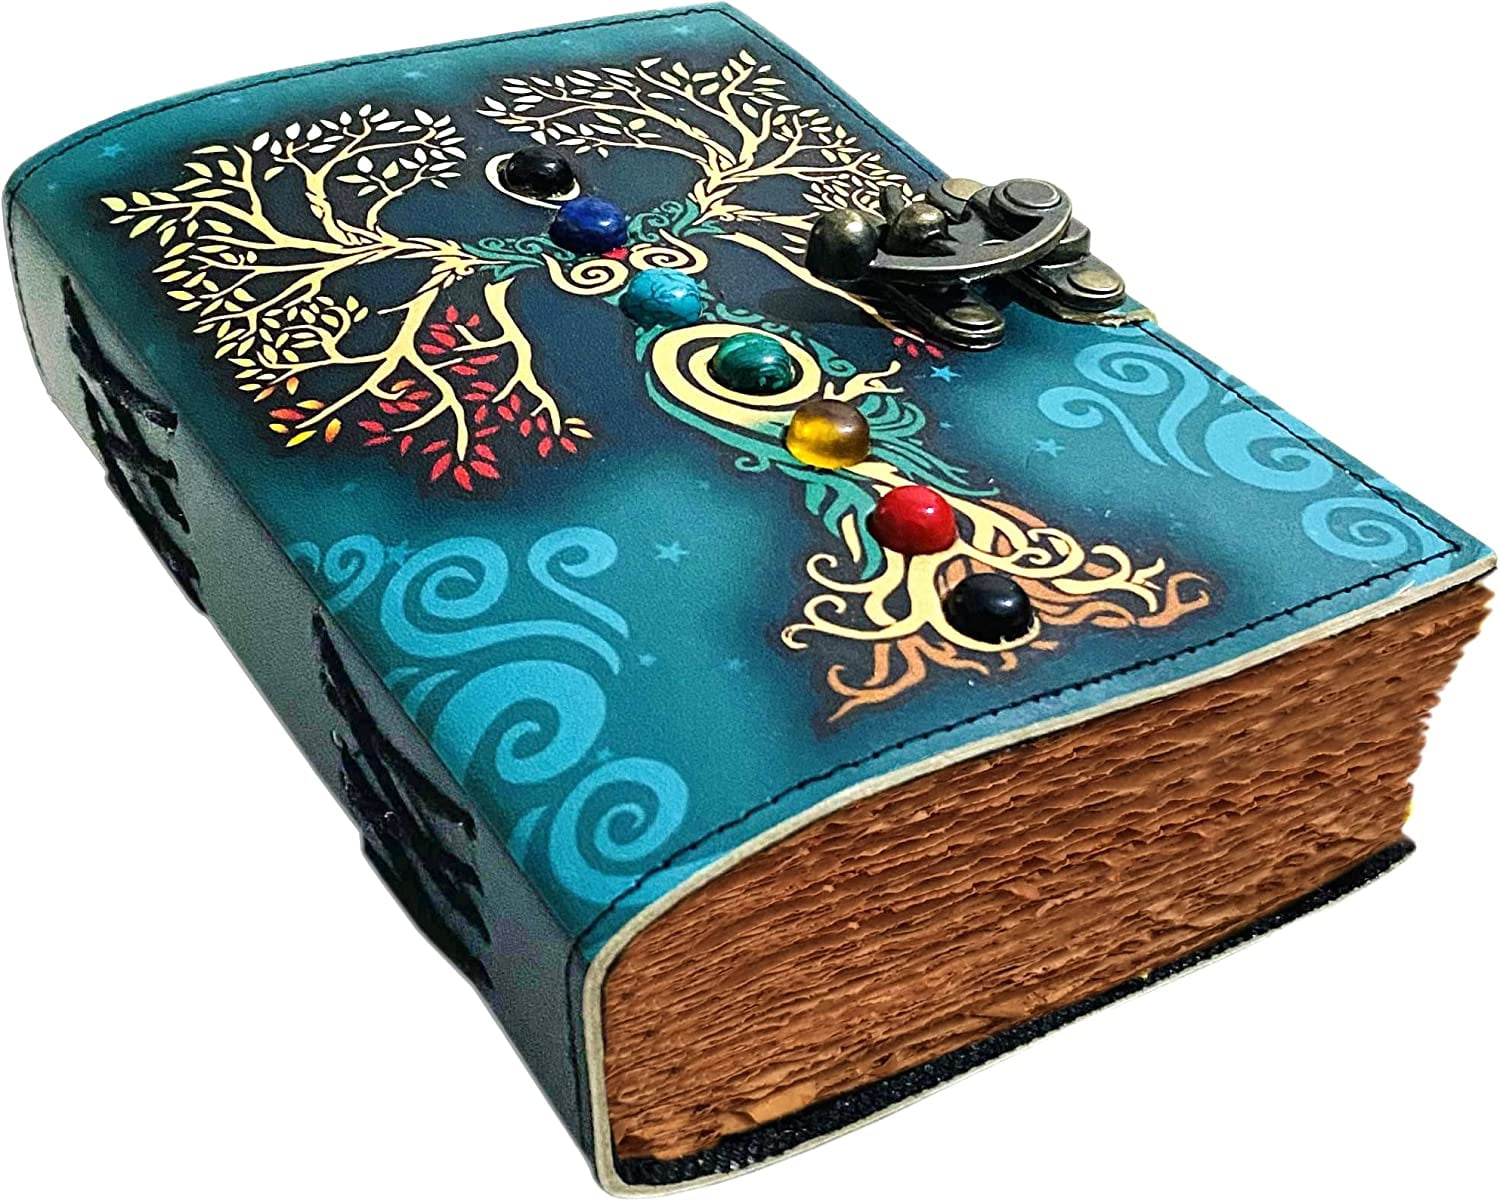 JILANI HANDICRAFT Blank Spell Book Of Shadows leather Journal embossed  Prayer Pagan antique print with deckle edge vintage pages 7X5 INCH (MOTHER  OF EARTH): 8900024790852: : Office Products